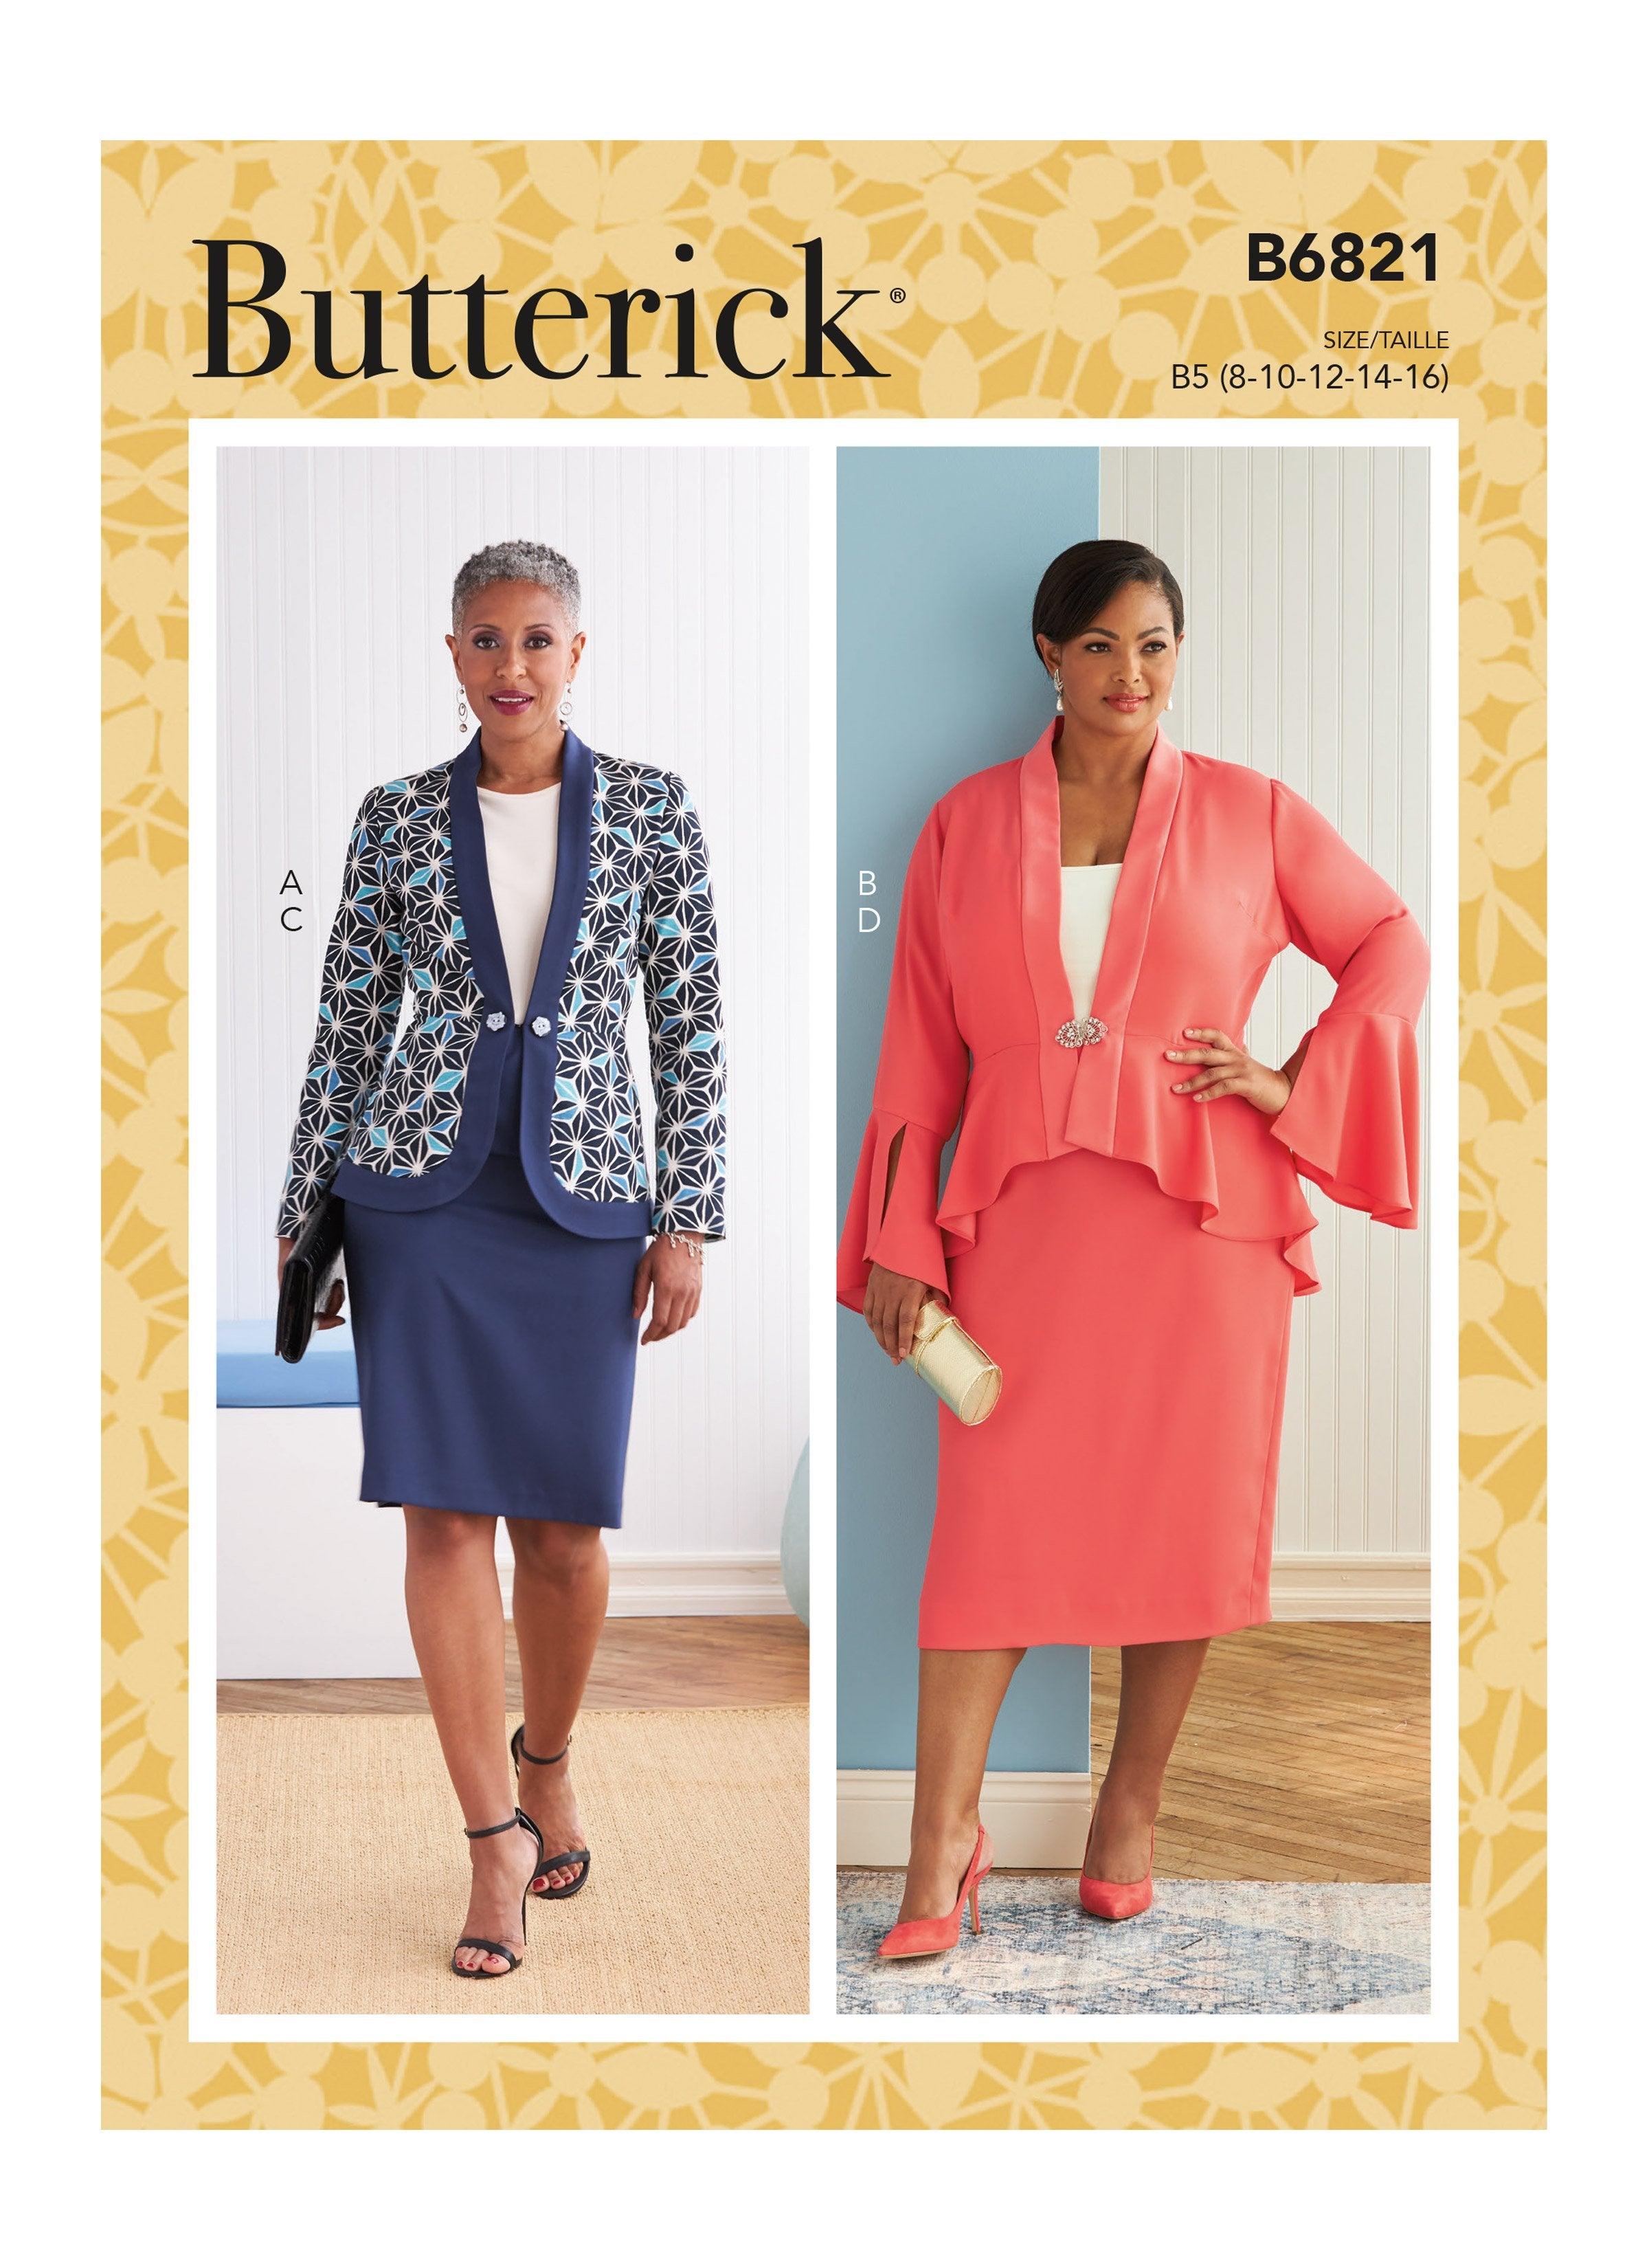 Butterick 6821 Misses / Plus Size Skirt Suit pattern from Jaycotts Sewing Supplies